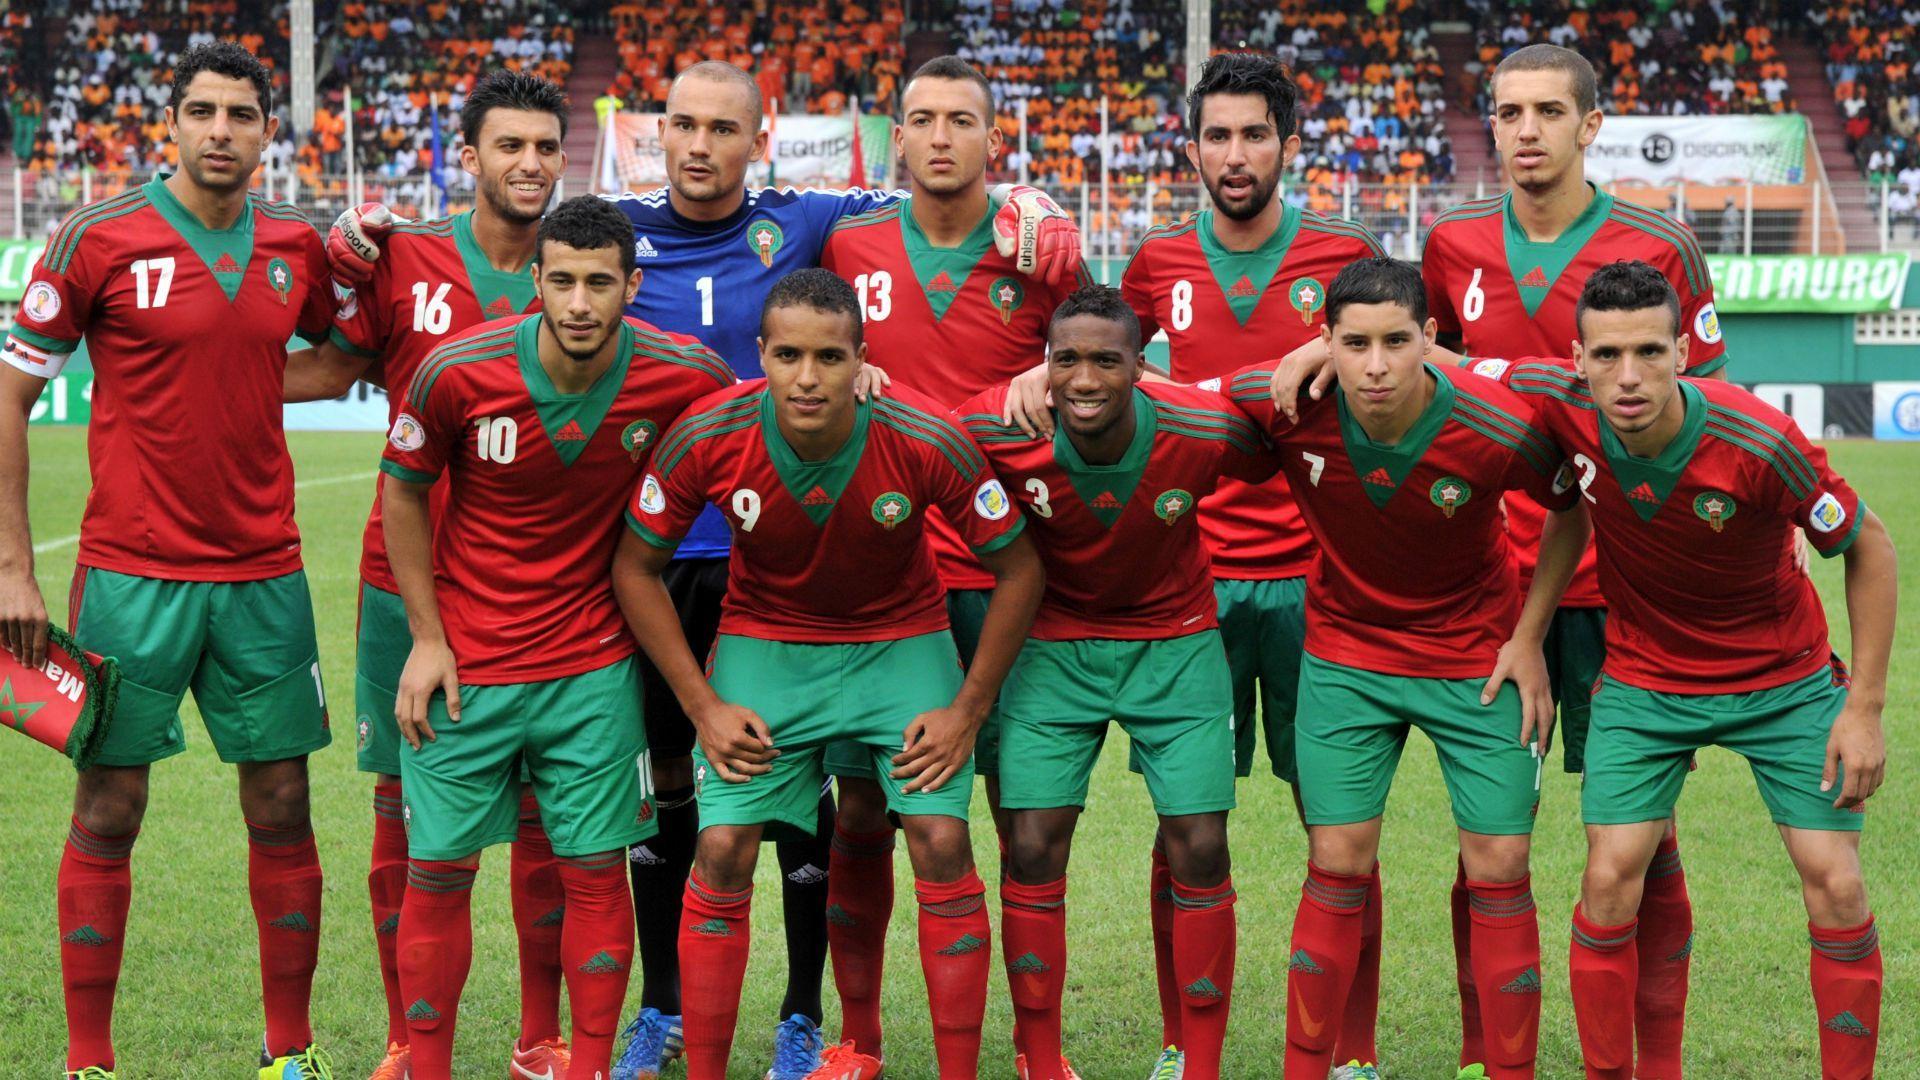 AFCON 2017 Team in Focus: Morocco